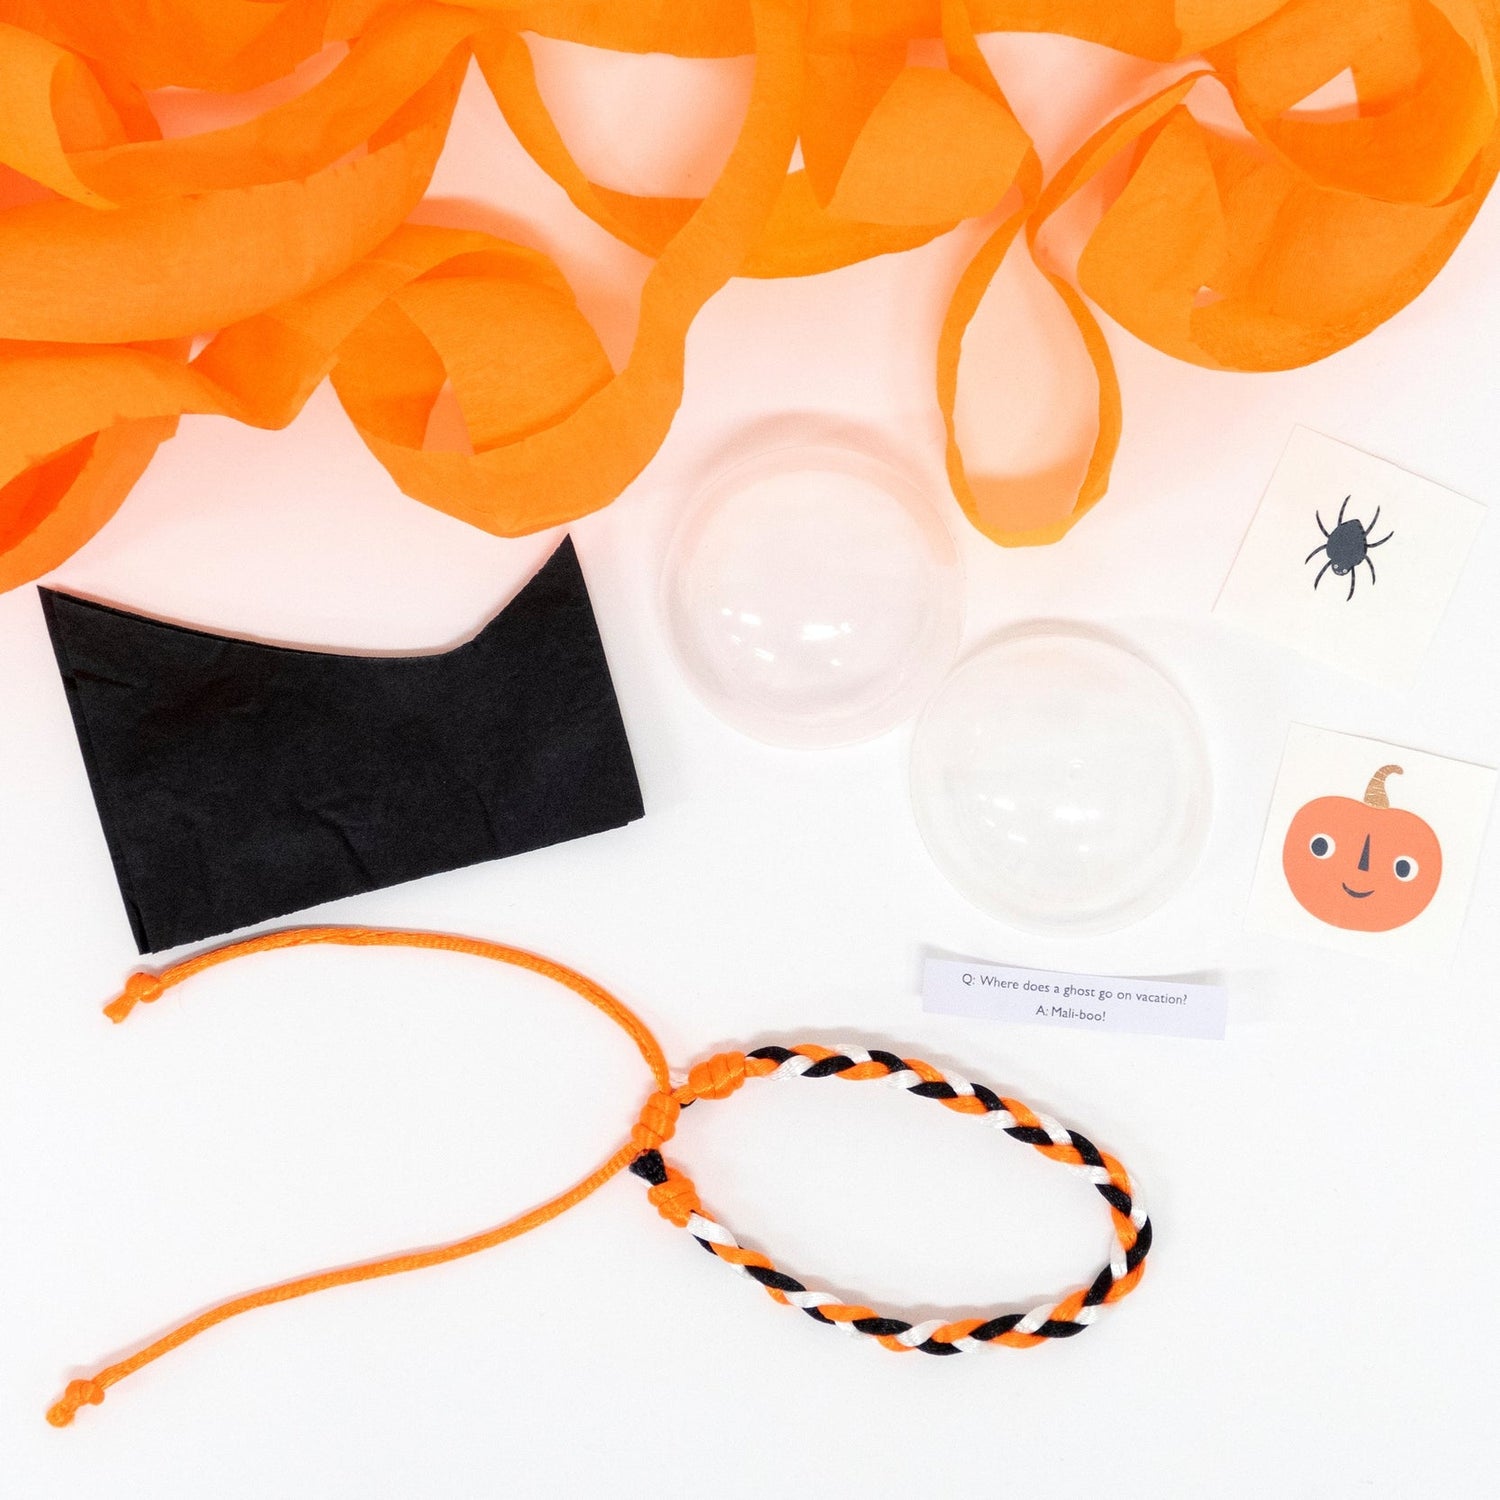  a friendship bracelet, in a plastic ball, 2 temporary tattoos with copper foil detail, a joke and a black tissue paper hat